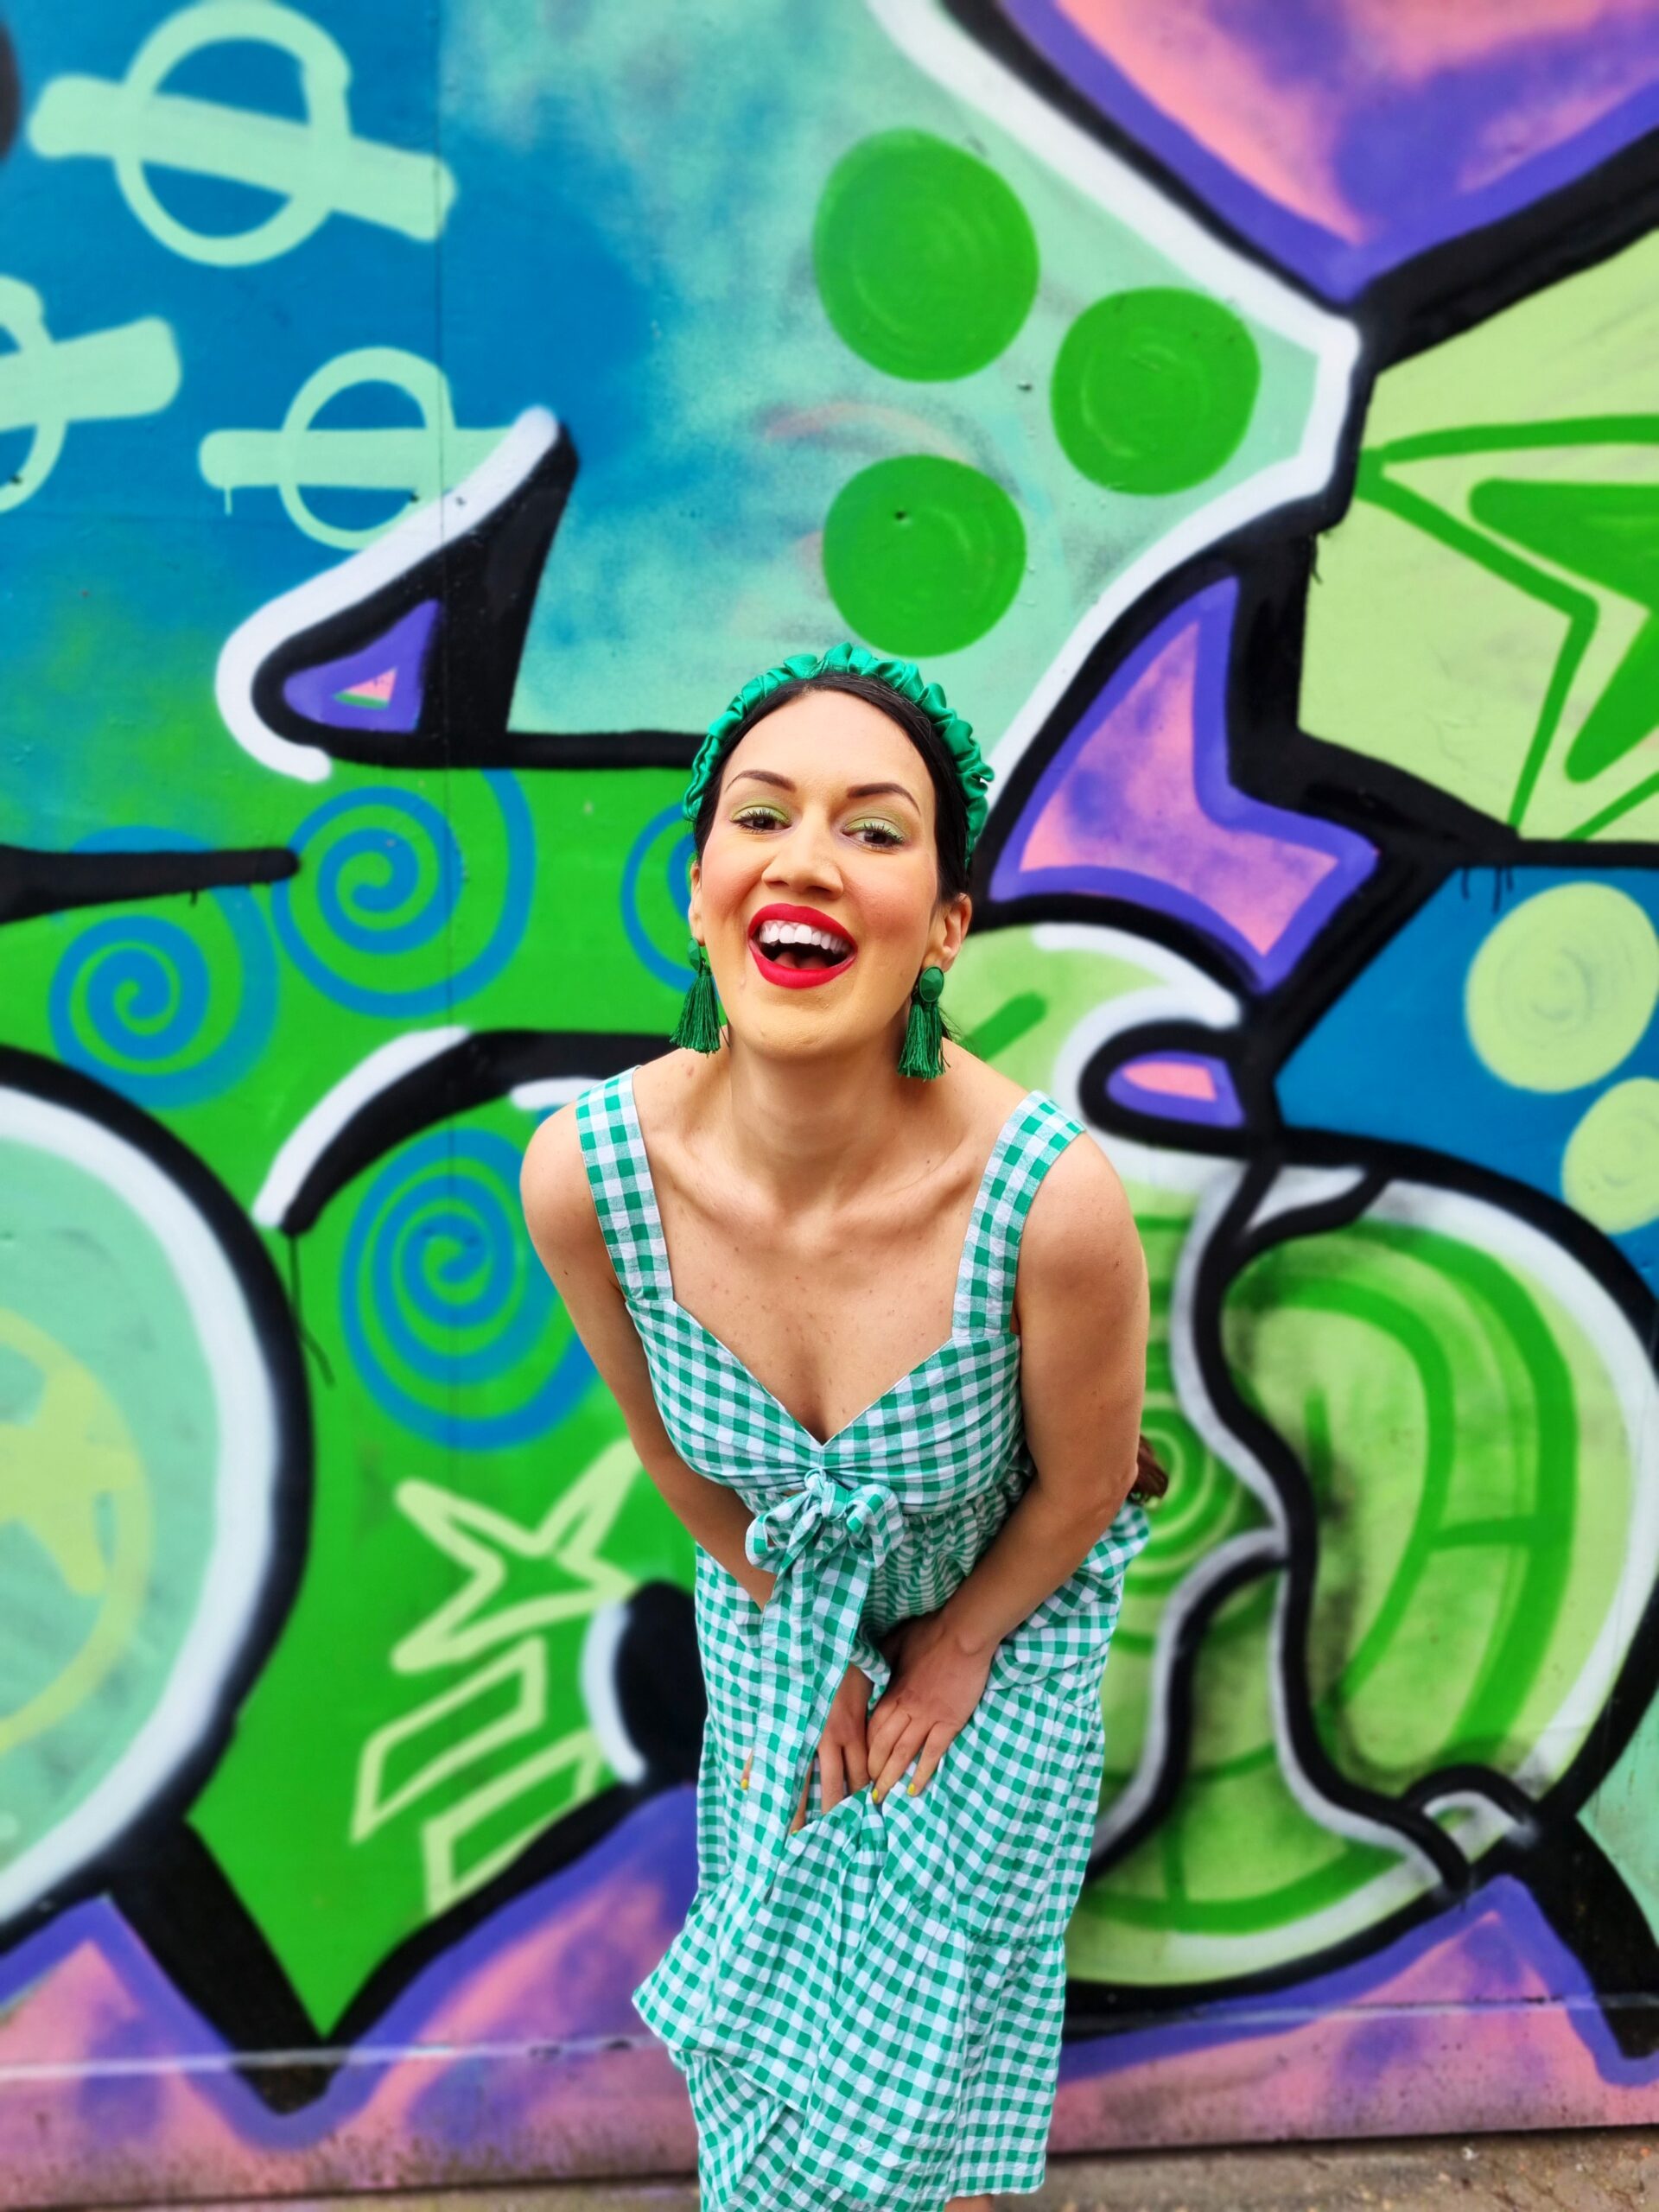 <img src="ana.jpg" alt="ana laughing in green strappy dress"/> 